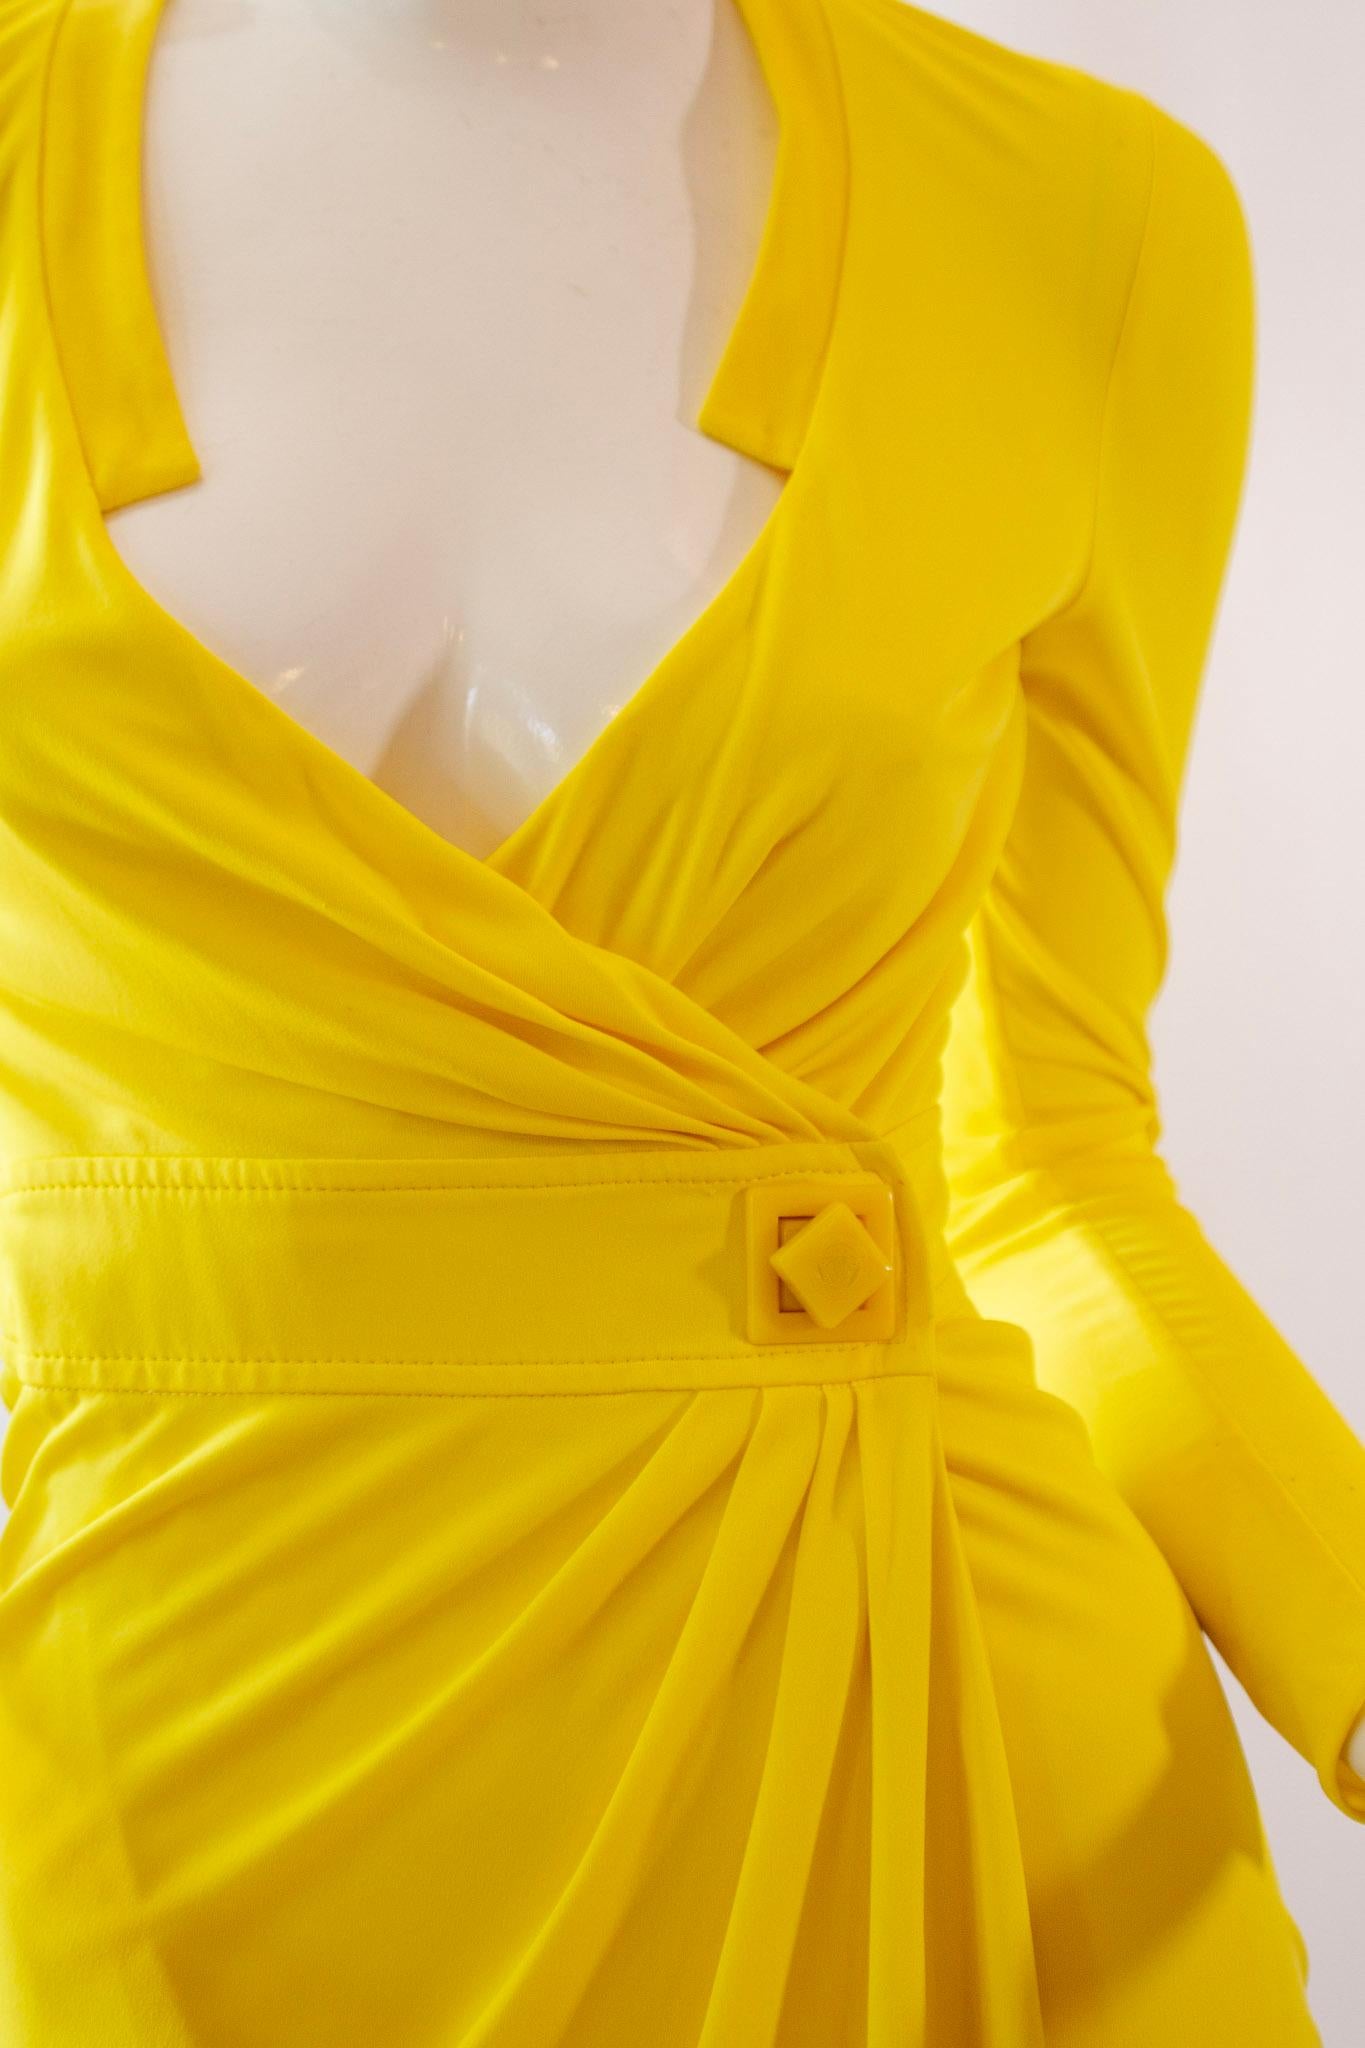 GIANNI VERSACE, Canary Yellow Mid-Length Wrap Dress with Iconic Medusa Fastener For Sale 3